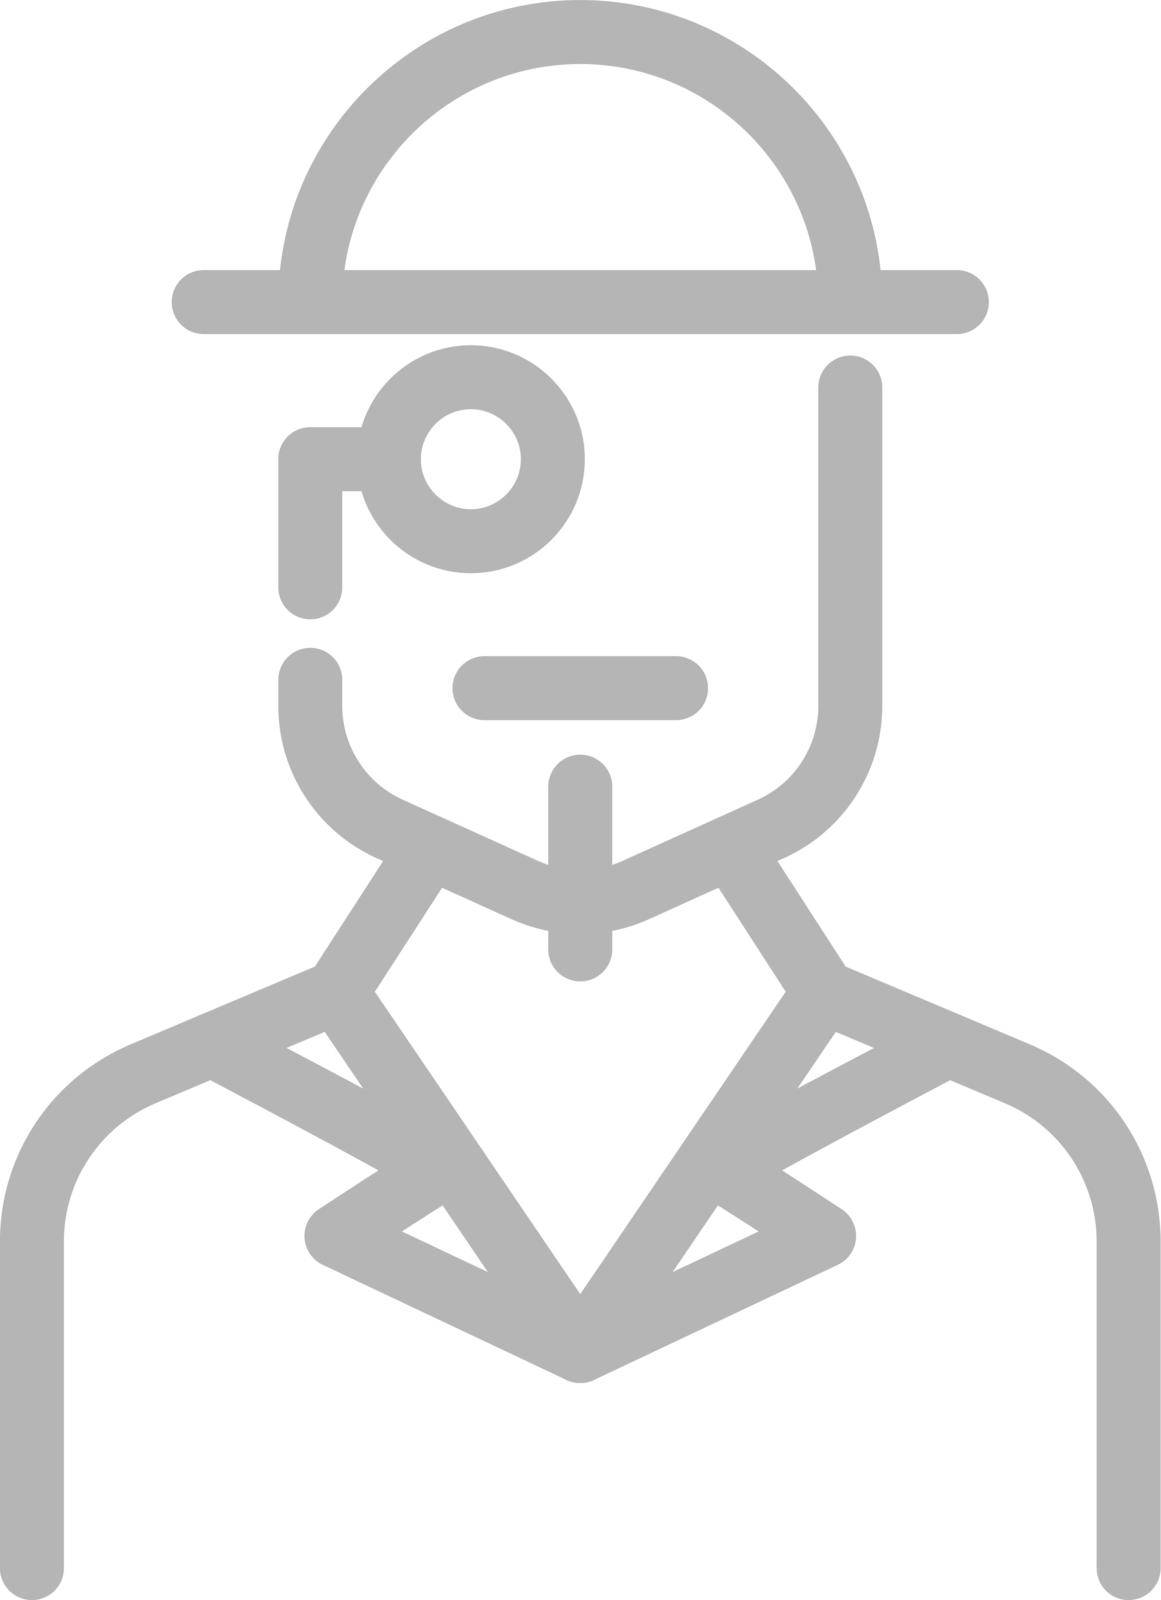 Man in bowler hat with monocle. Vintage gentleman icon. Hipster logo by MicroOne